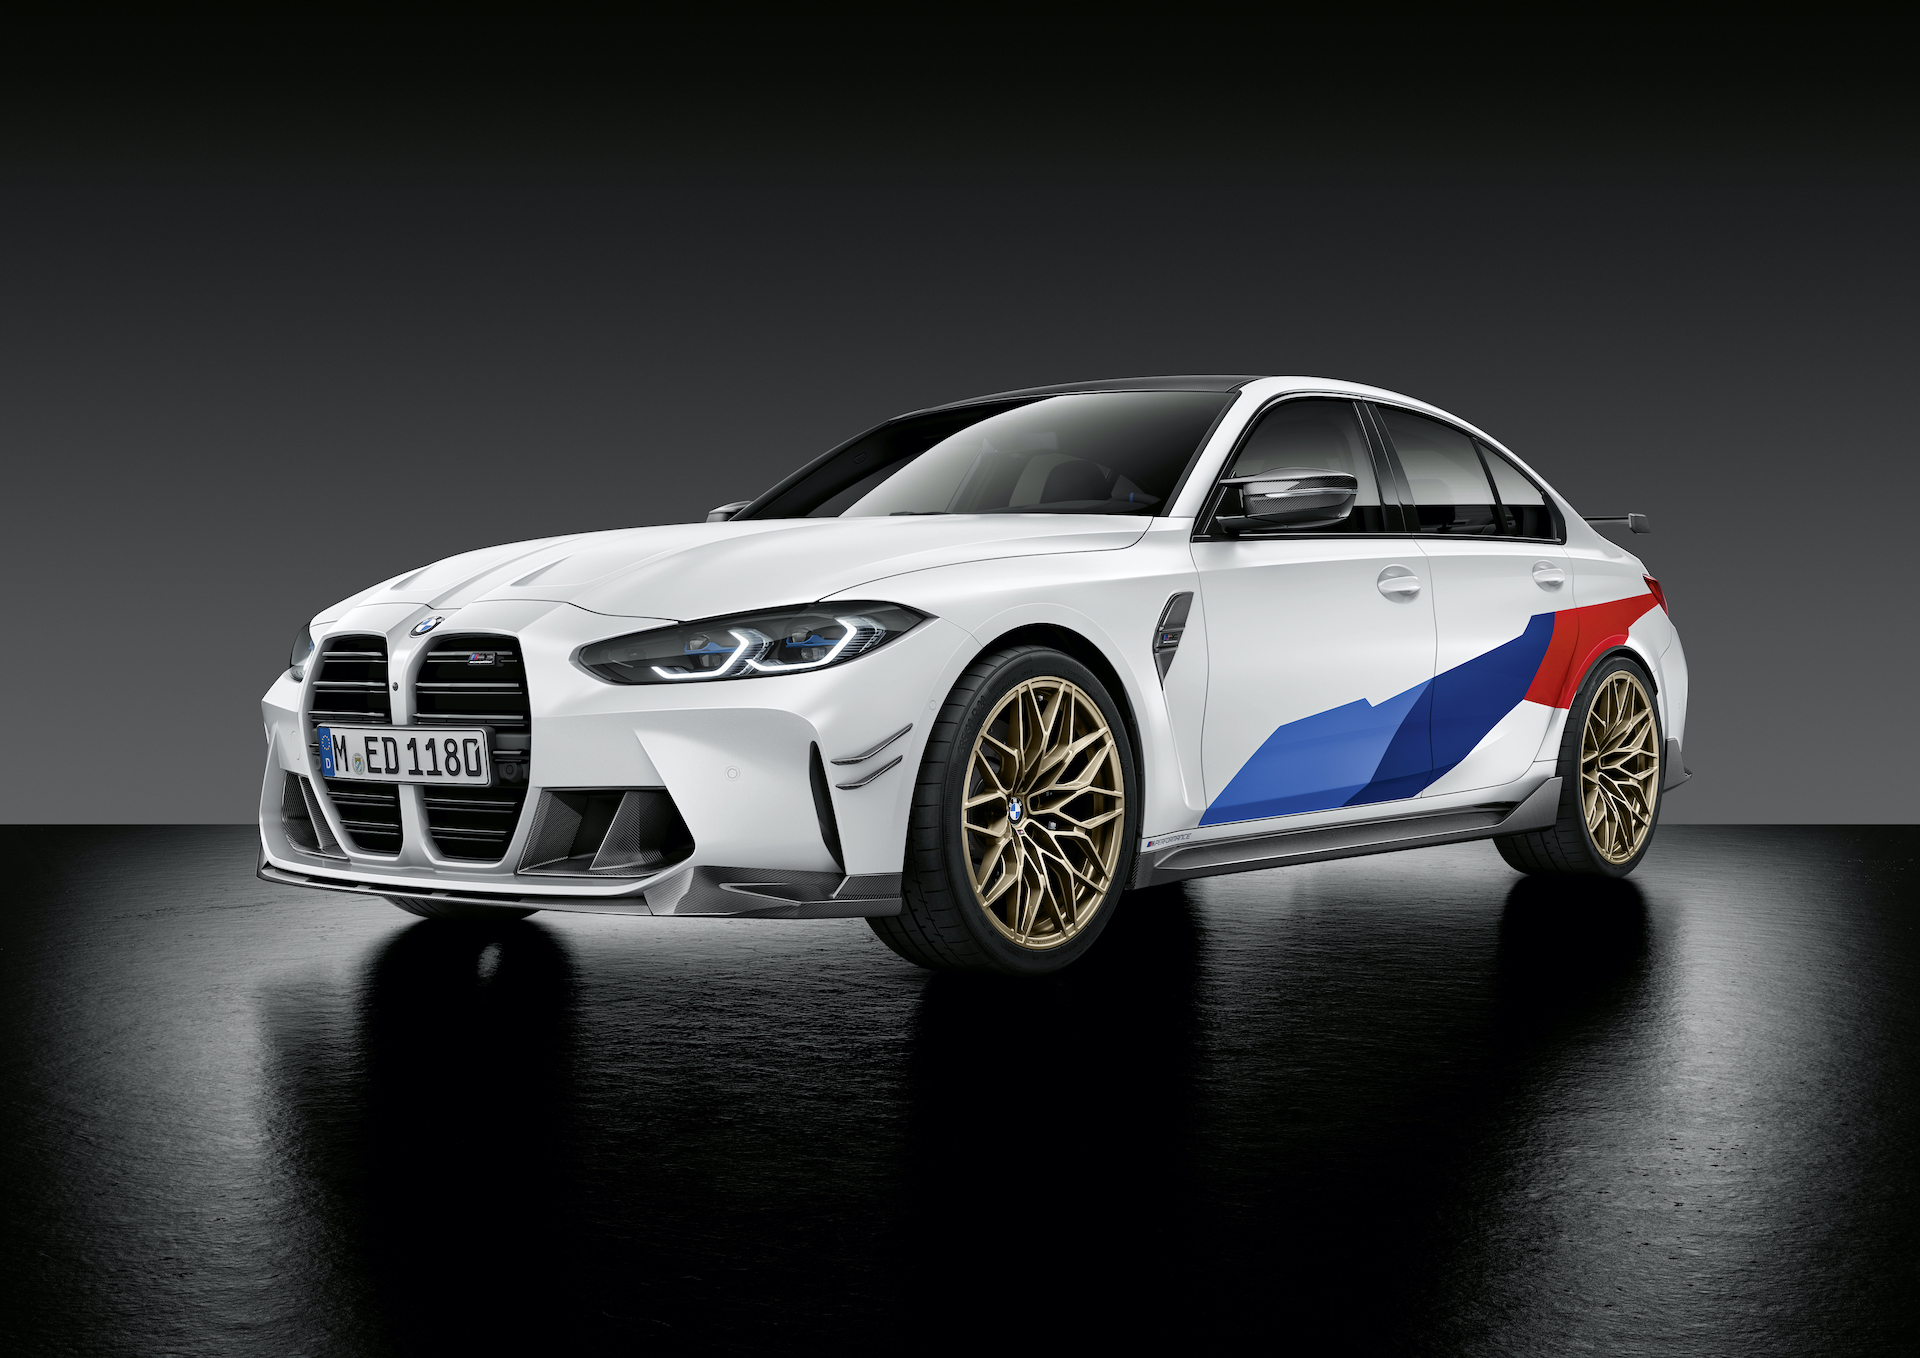 The BMW M3 and M4 are the newest sportscars from BMW and have a controversial new front grille design.